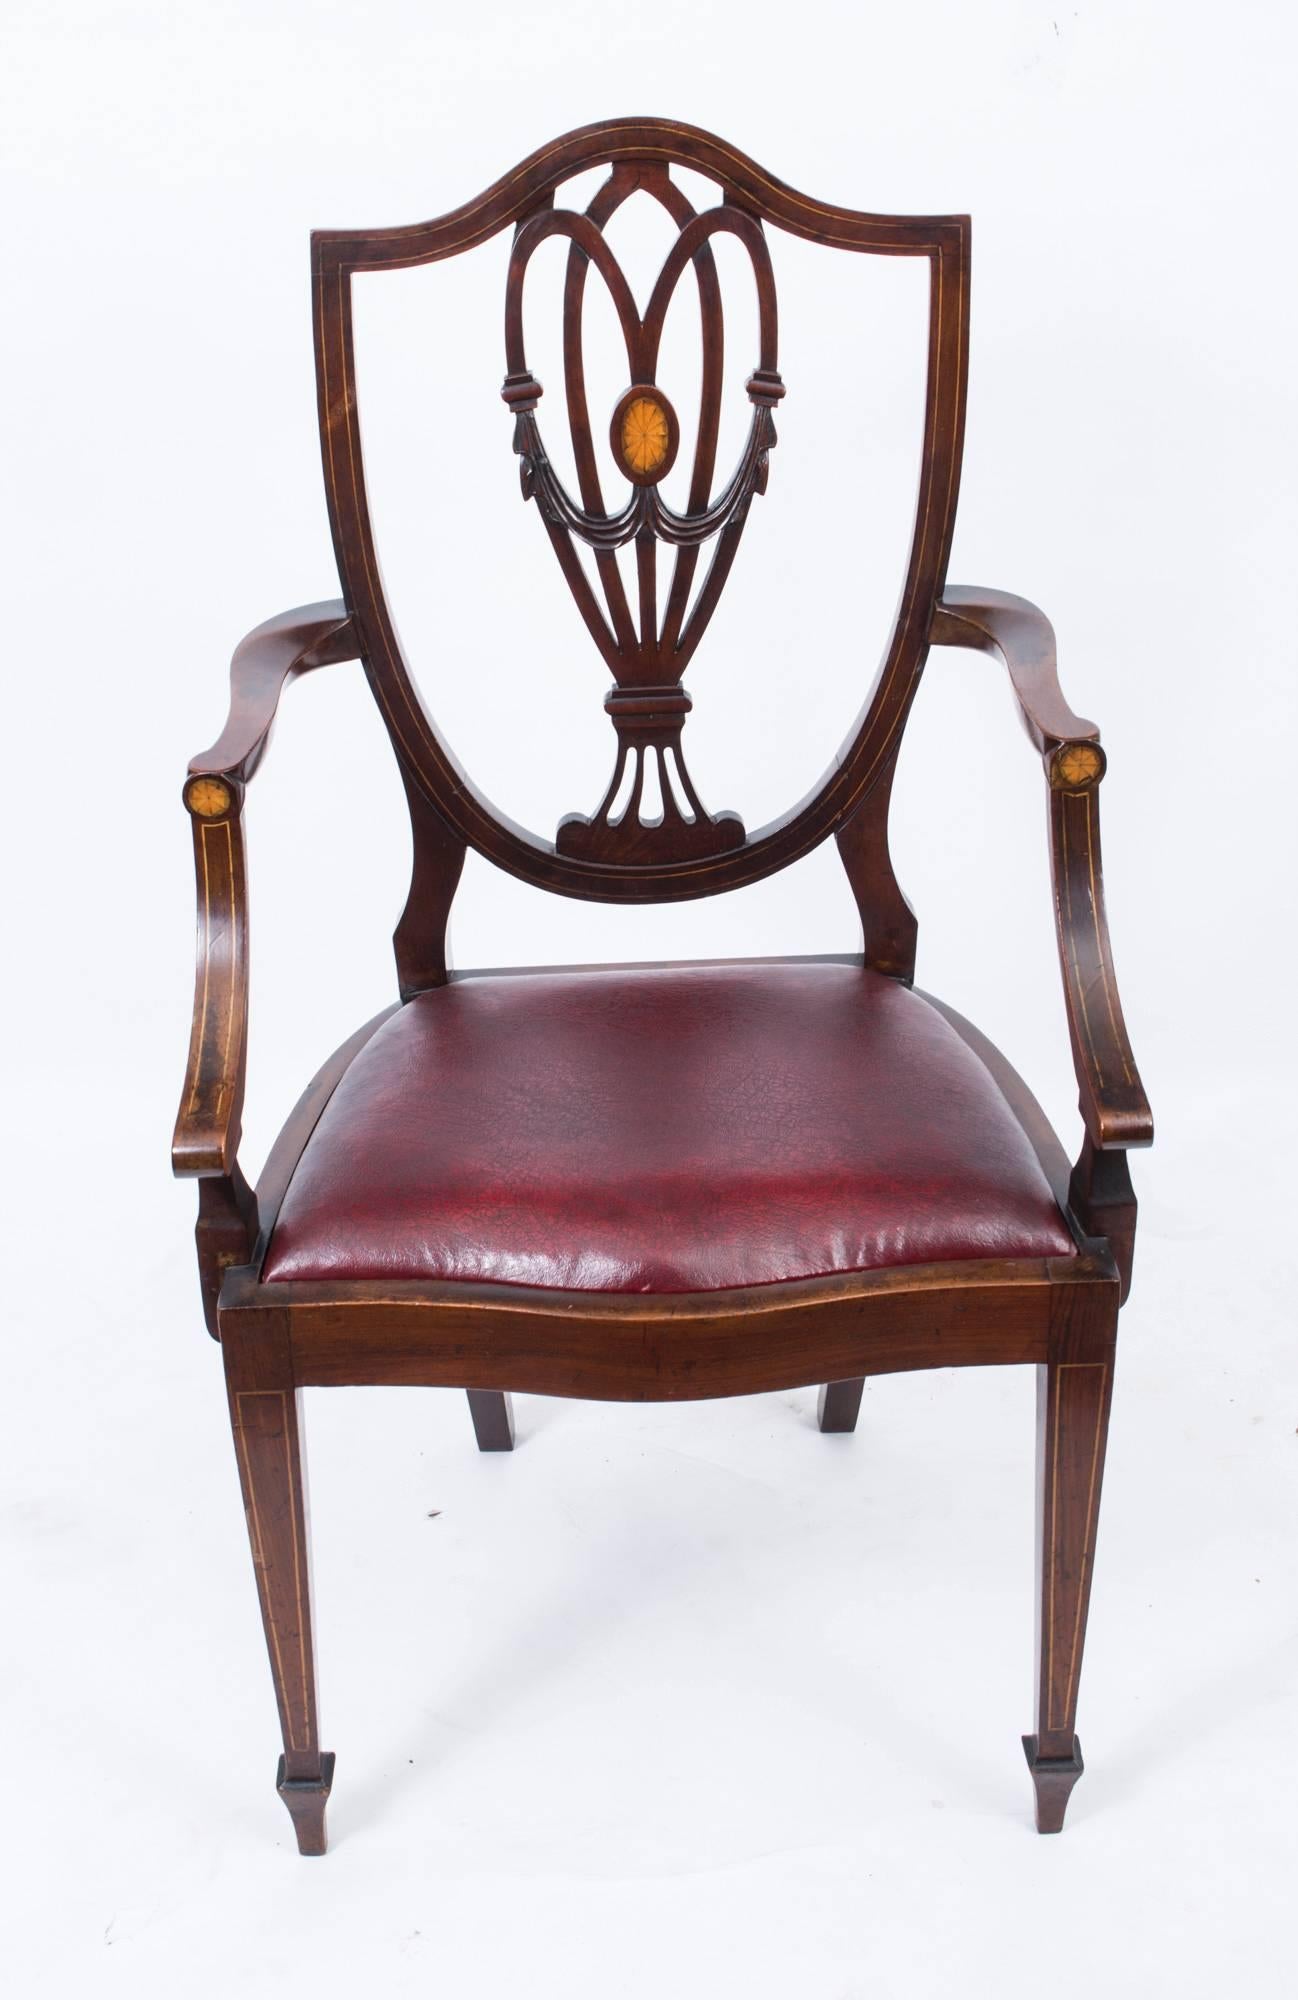 1900 chairs